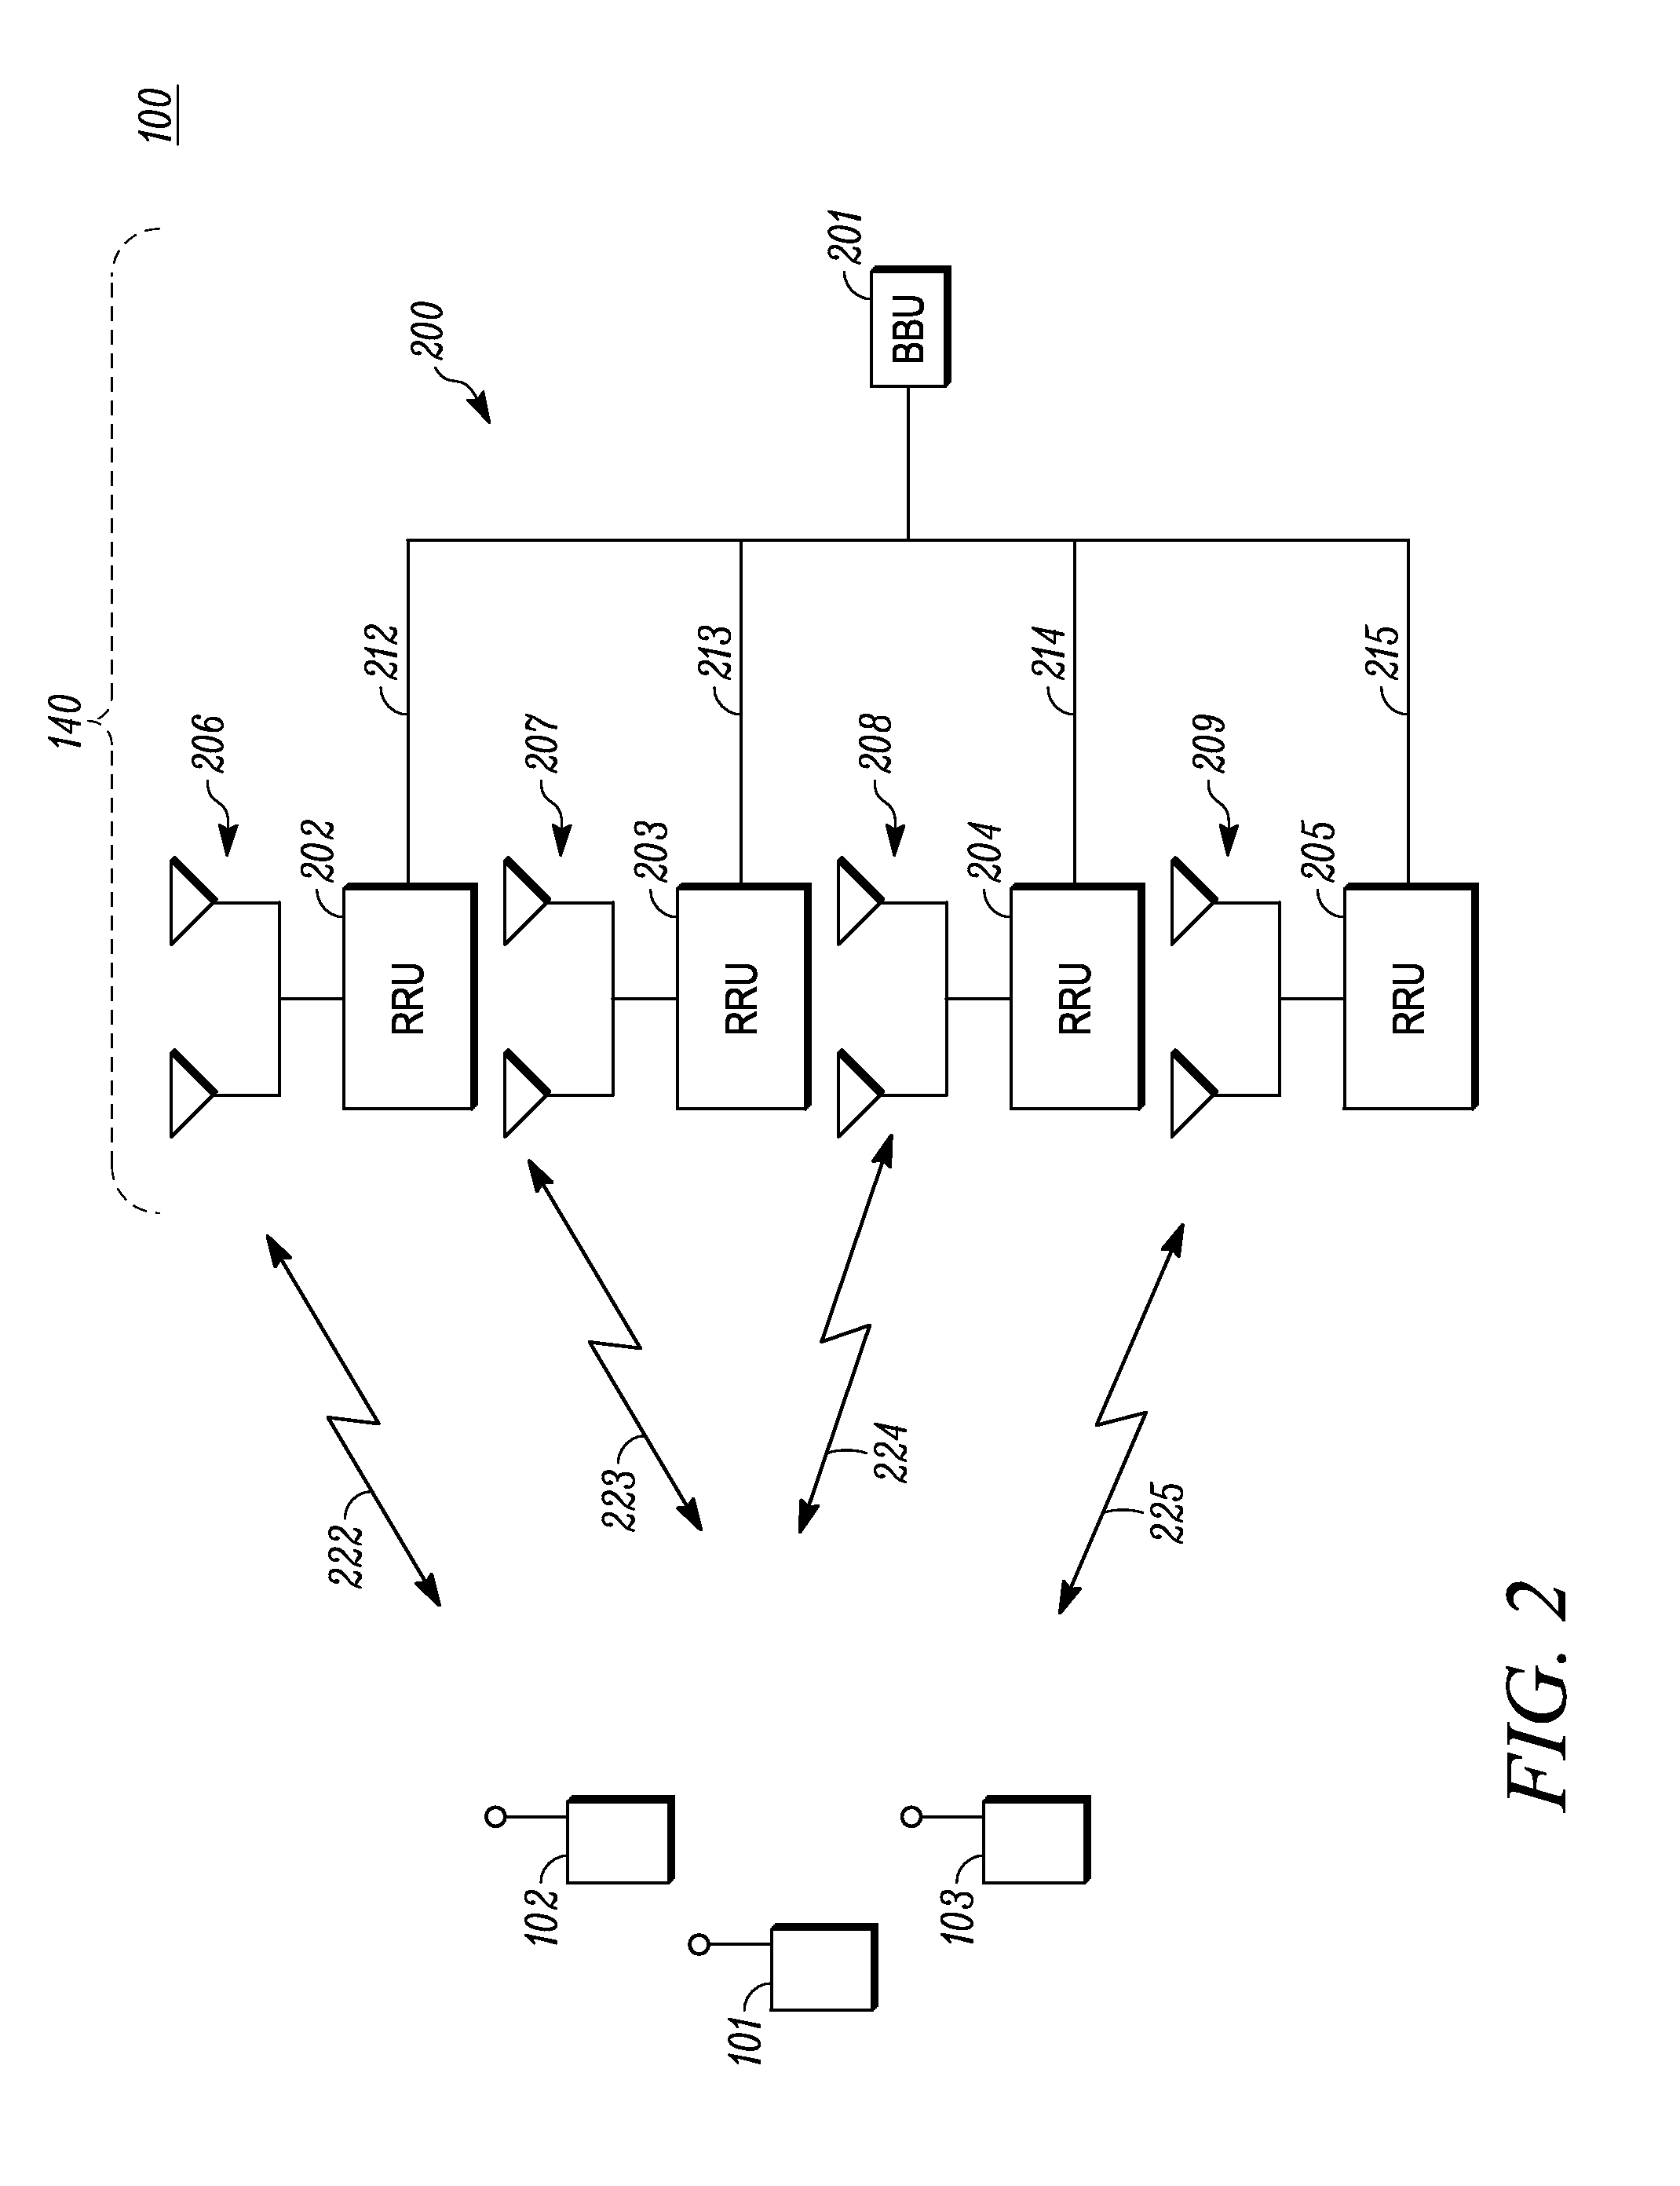 Method and apparatus for csi feedback for joint processing schemes in an orthogonal frequency division multiplexing communication system with coordinated multi-point transmission